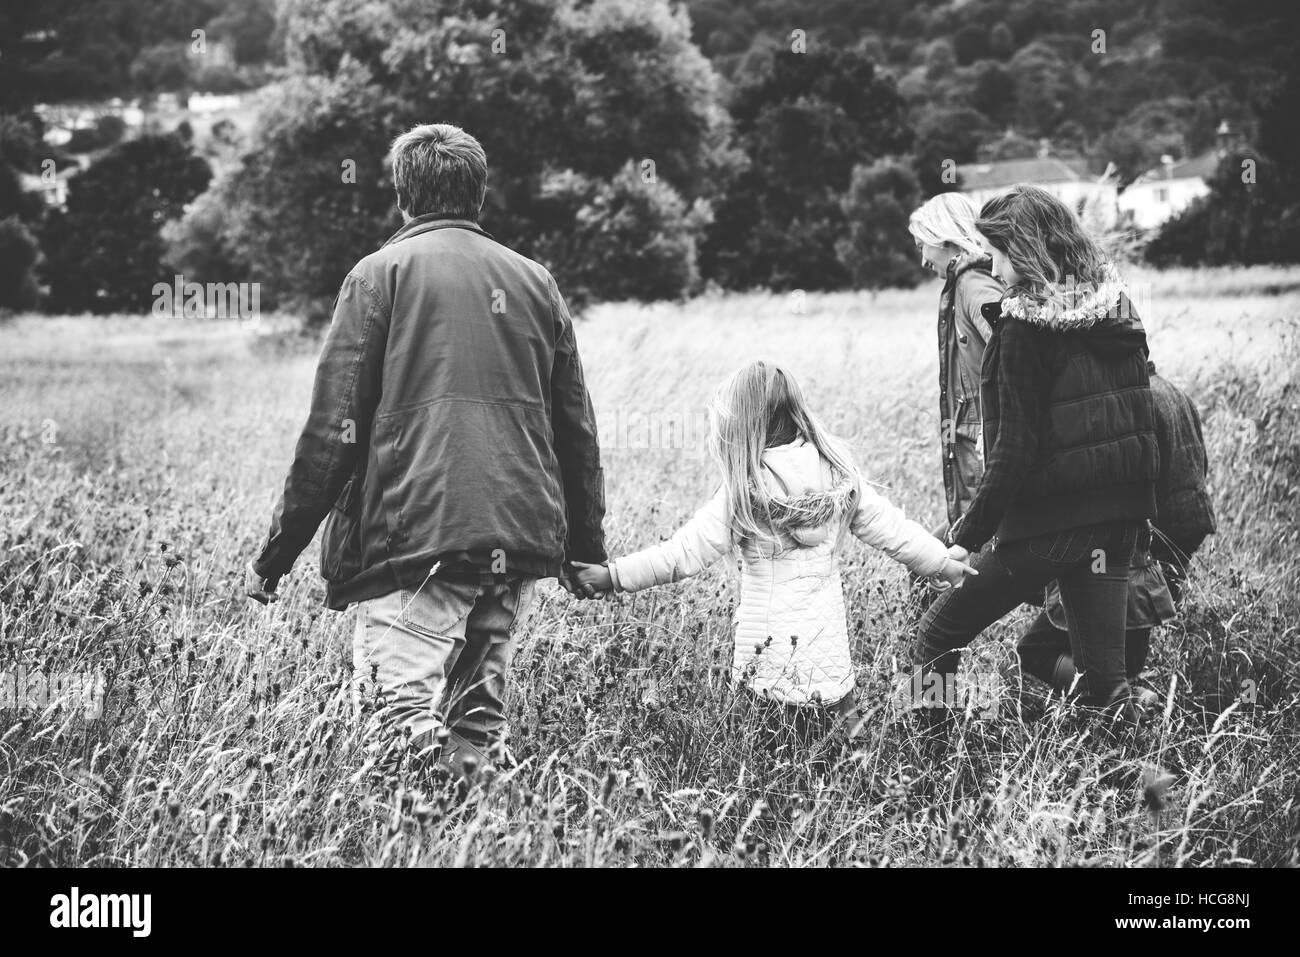 Family Walking Field Nature Togetherness Concept Stock Photo - Alamy